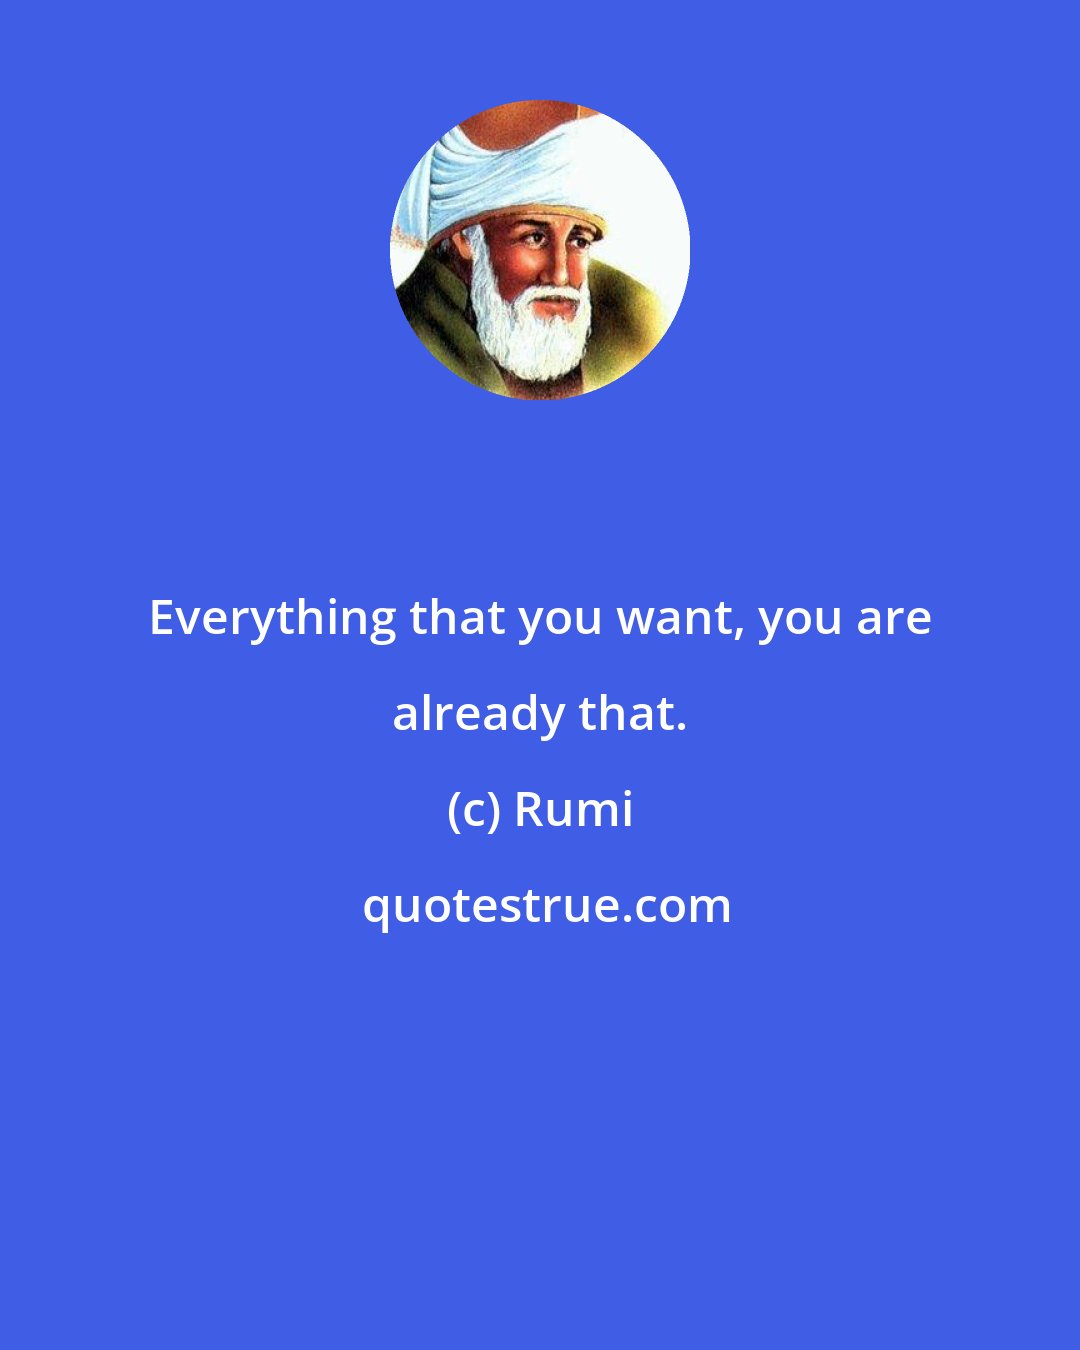 Rumi: Everything that you want, you are already that.